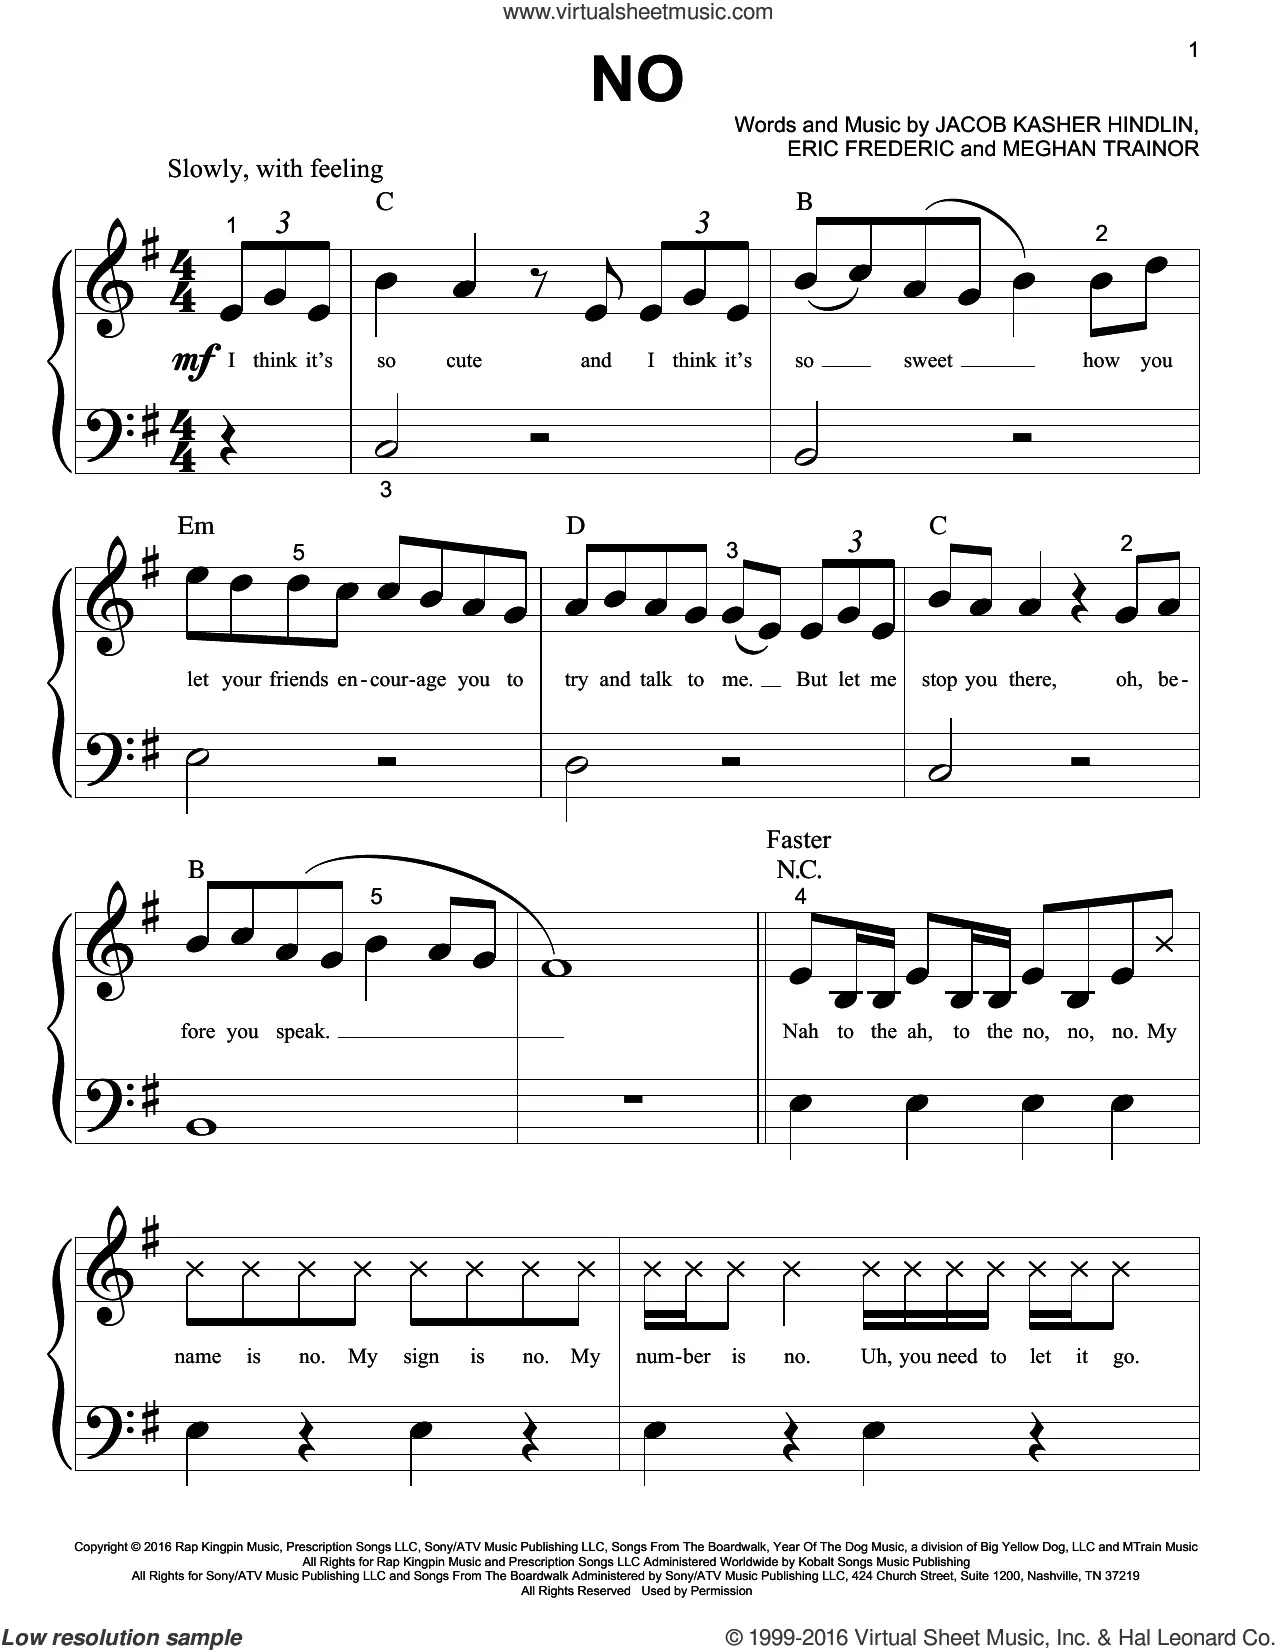 Made You Look - Meghan Trainor Sheet music for Piano (Solo